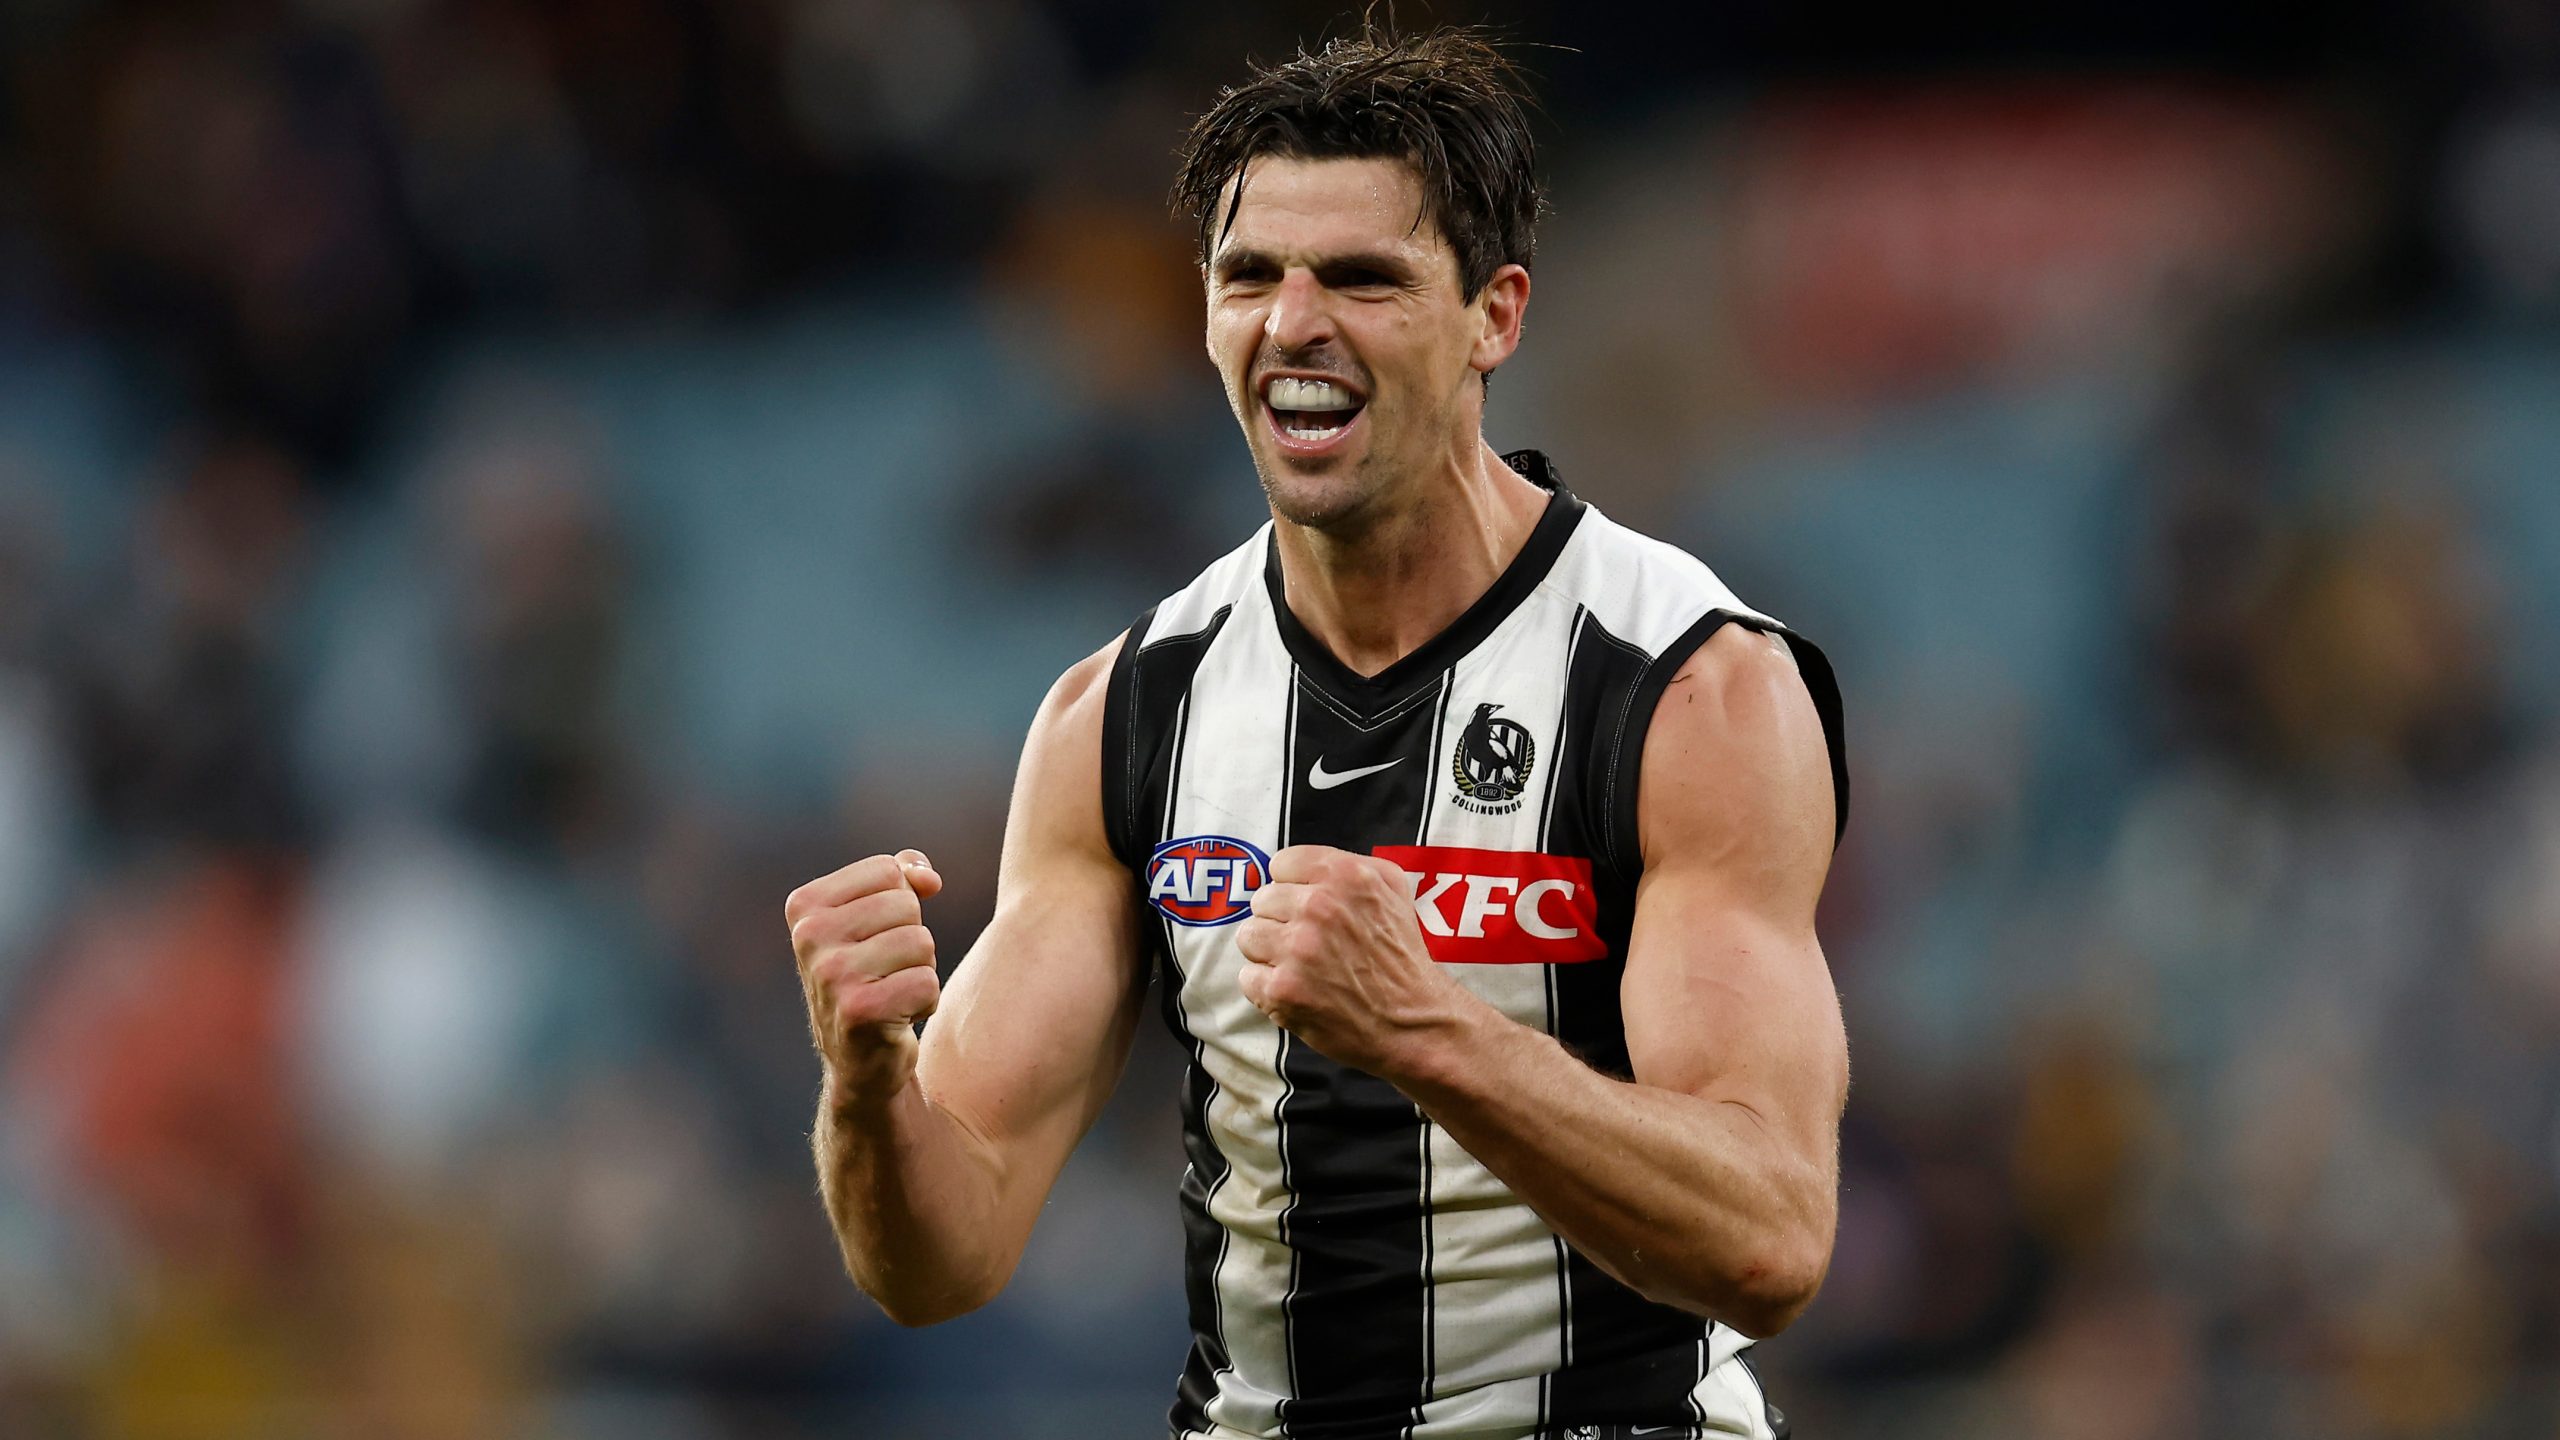 Another record for Pendlebury | Gippsland Times